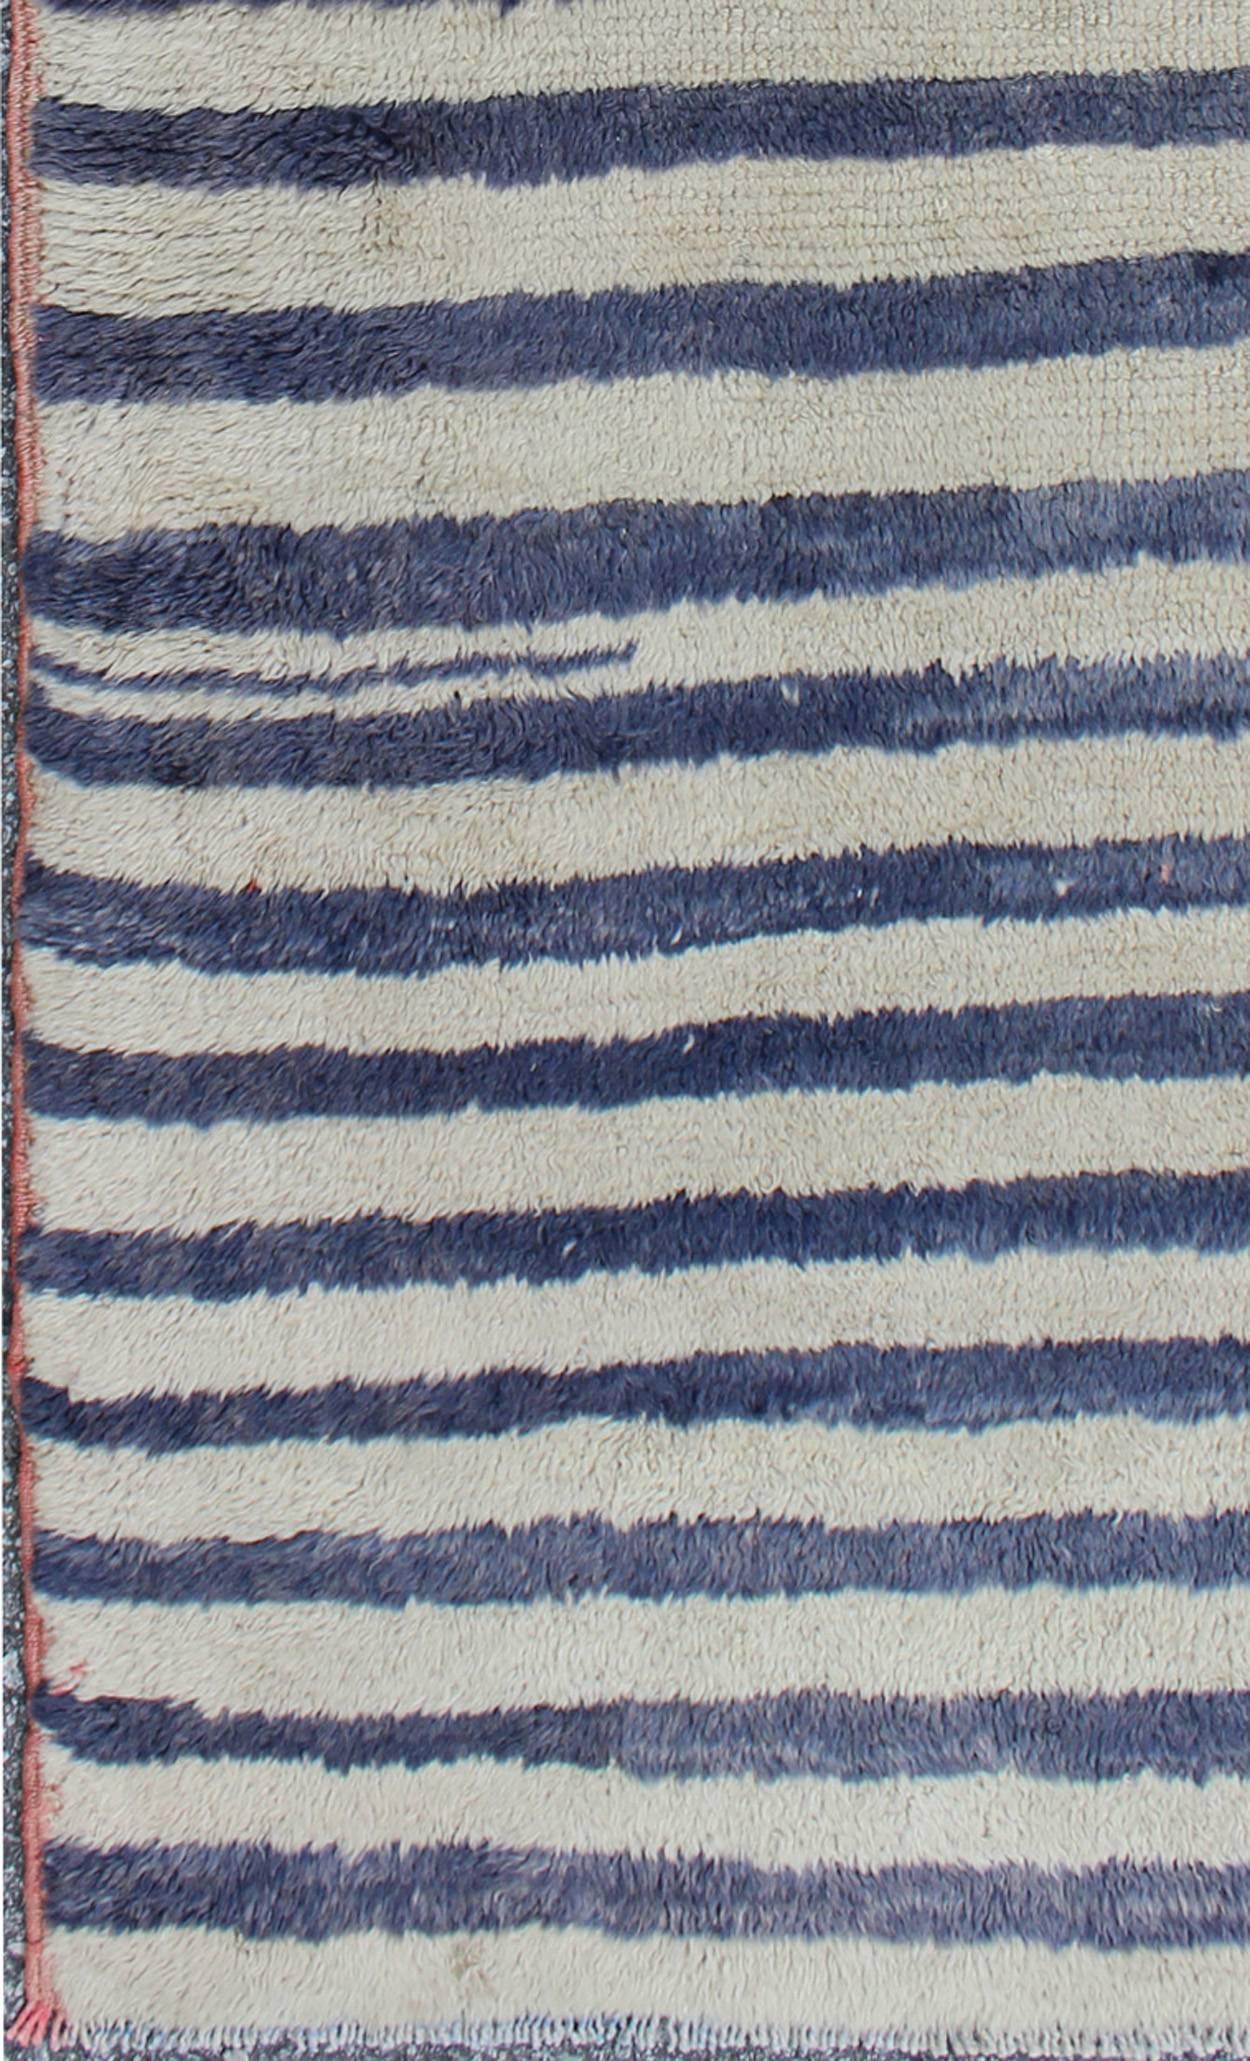  Tulu Carpet with Cream and Navy Blue Stripe Pattern rug/en-141520  origin/turkey 

This high-pile shaggy Tulu rug is handwoven from wool in a soft color palette, featuring a striped pattern of cream and navy blue. Tulu carpets' unique texture and